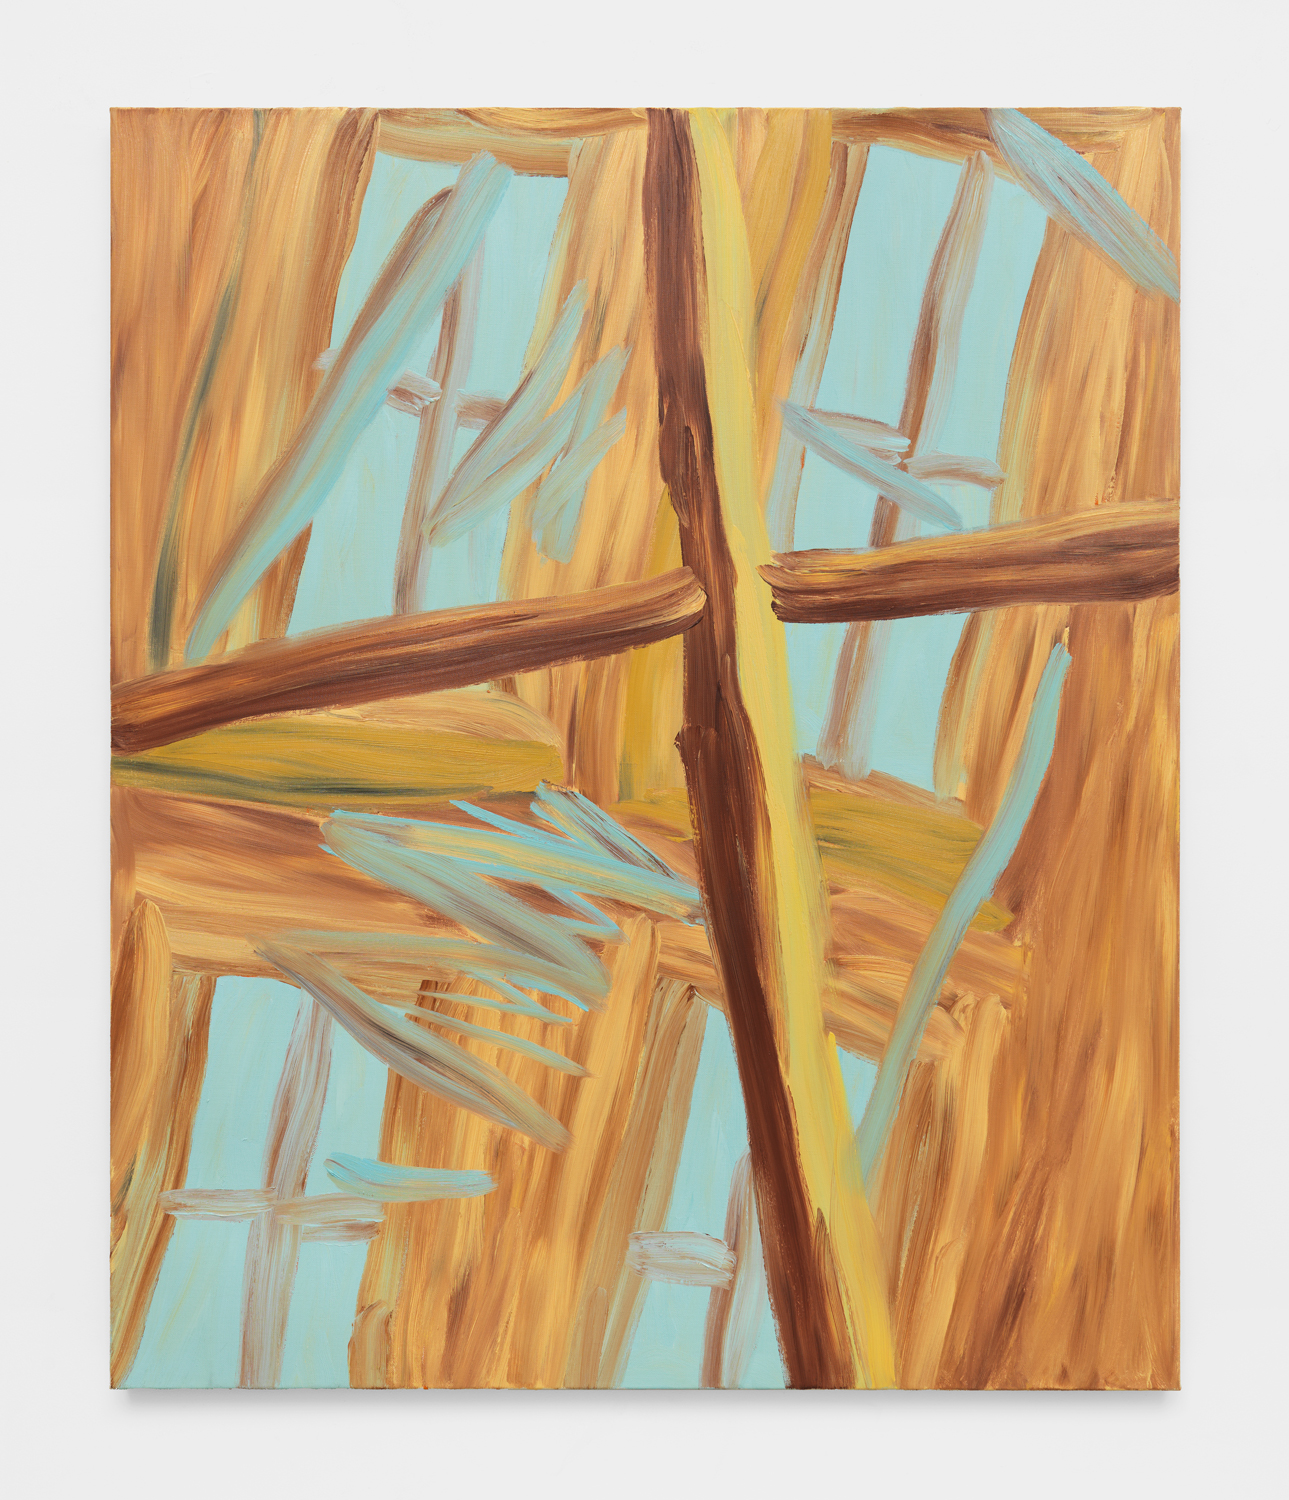 Martha Diamond, Windows, 1984, Oil on linen, 72h x 64w in, Exhibited at Independent NY, Magenta Plains, New York, NY, September 9–12, 2021.